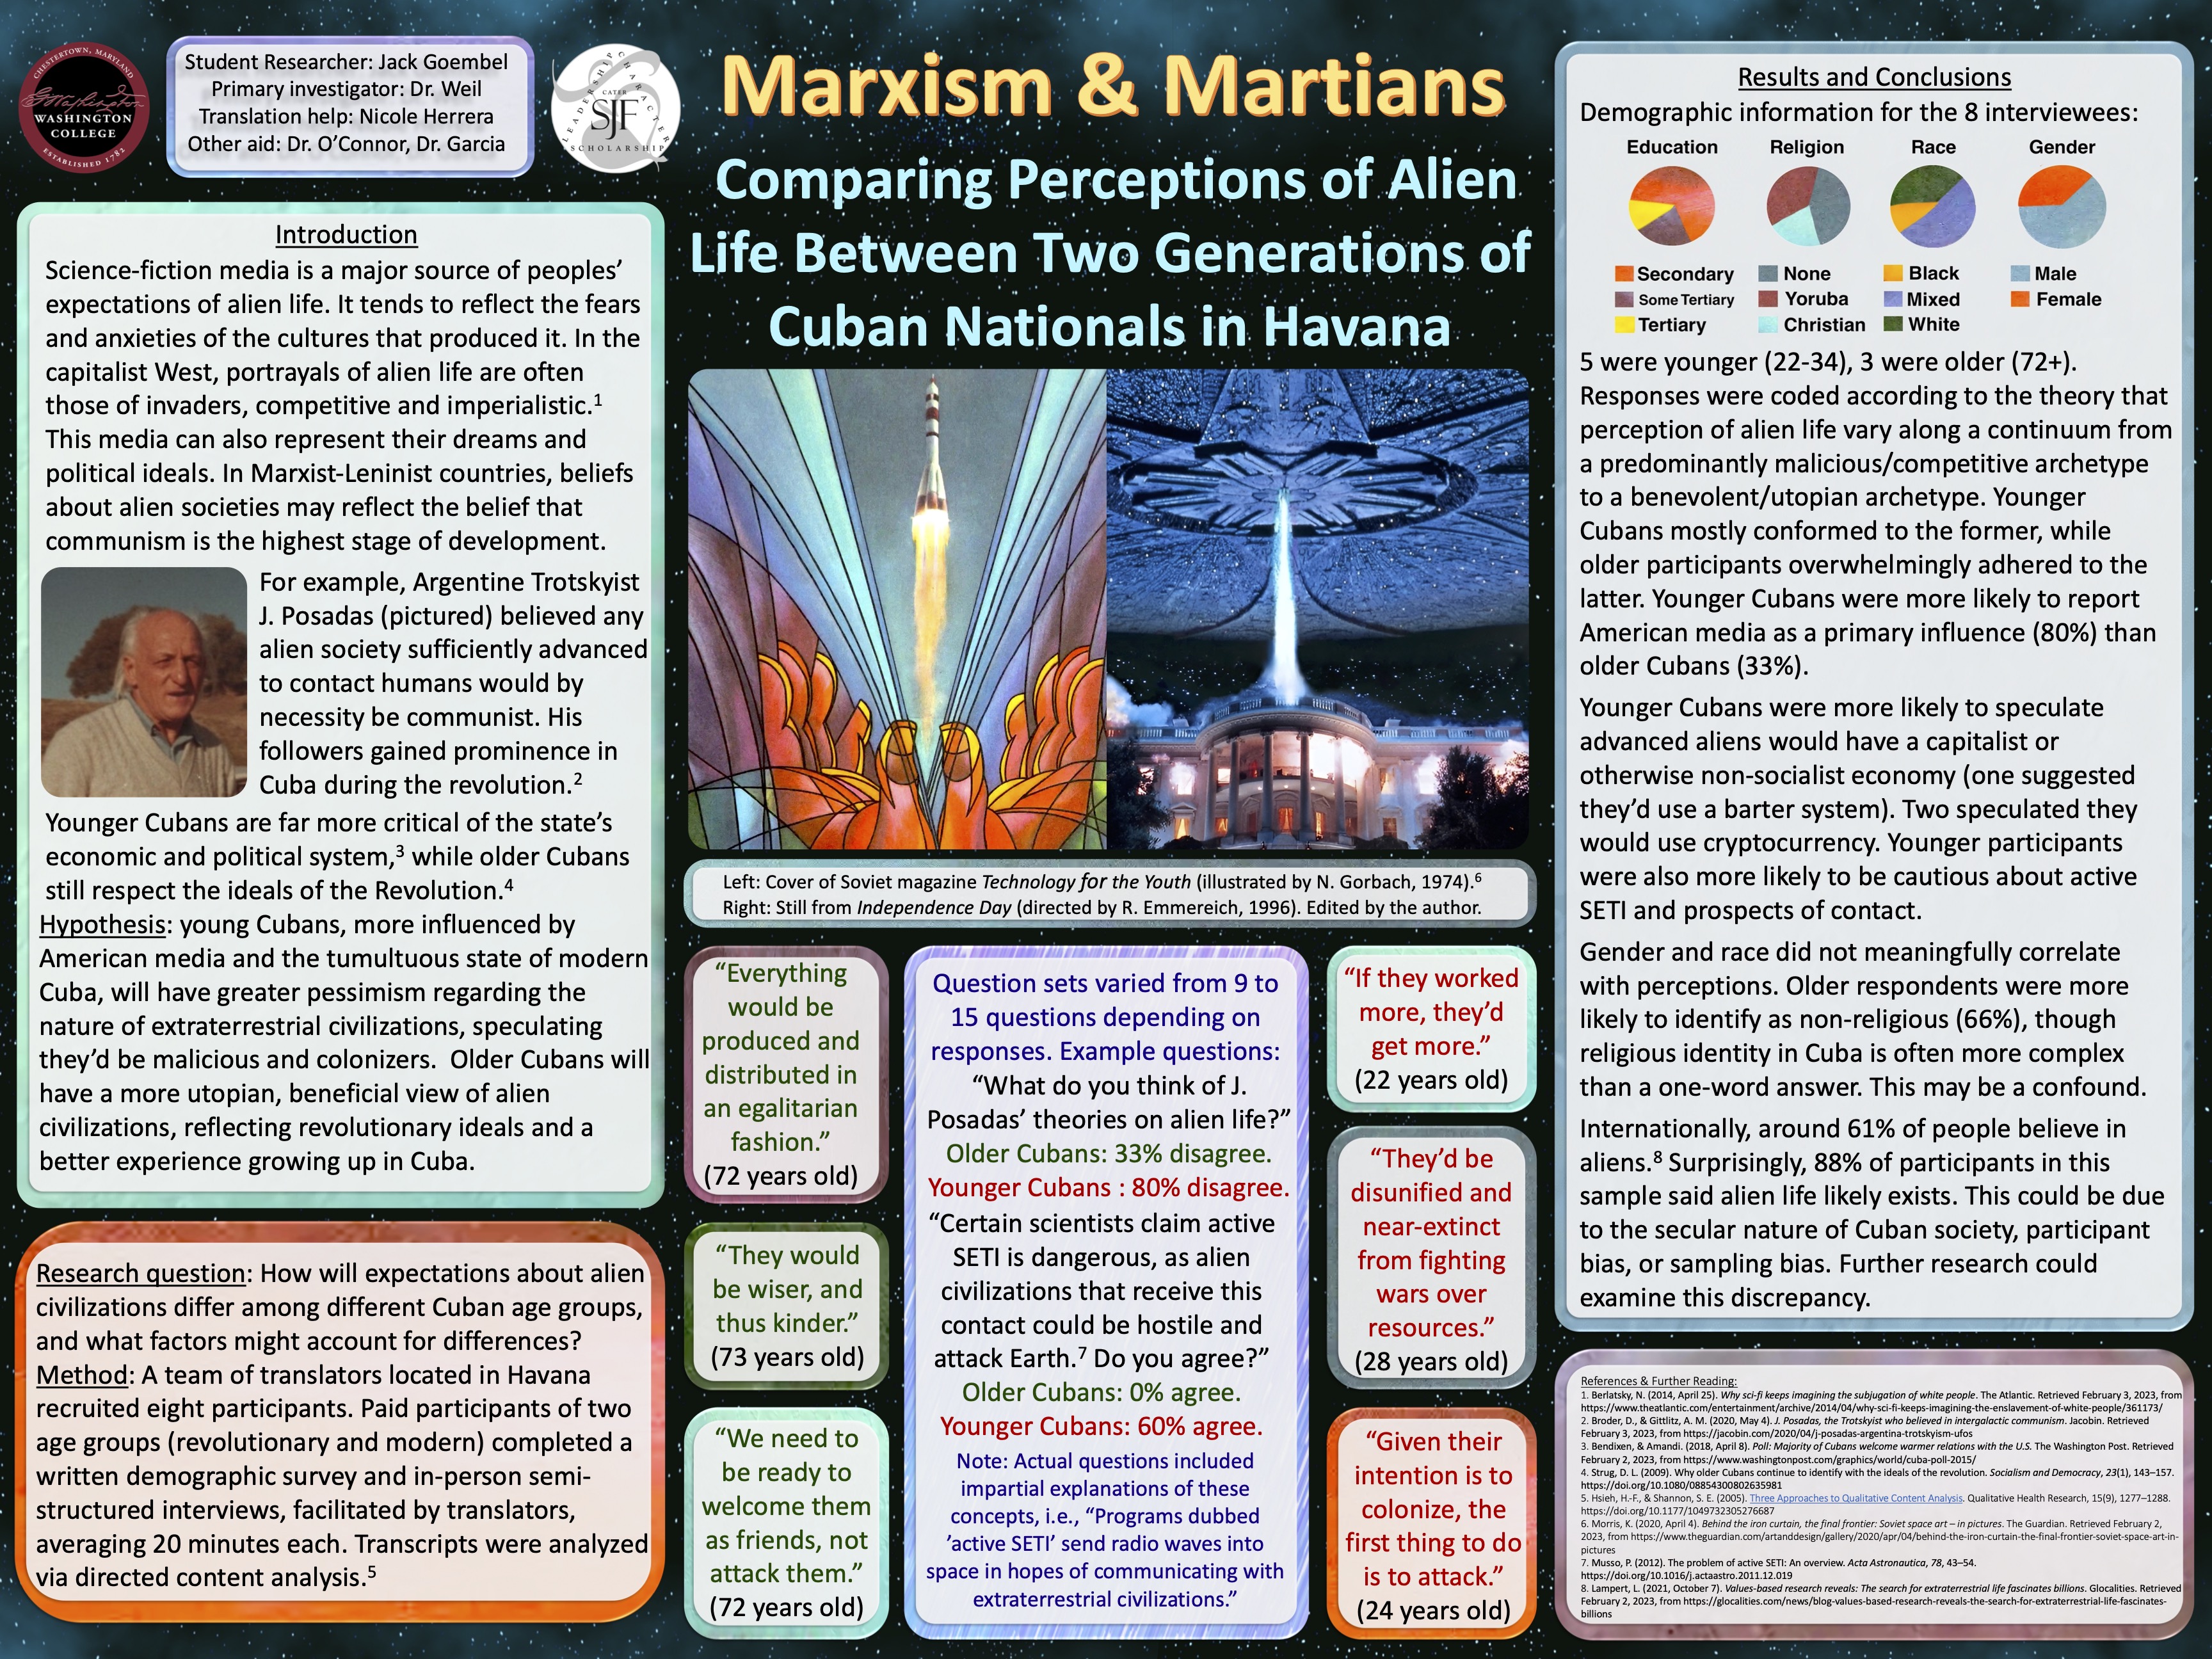 Jack's poster presentation of "Marxism and Martians: Comparing Perceptions of Alien Life Between Two Generations of Cuban Nationals in Havana"